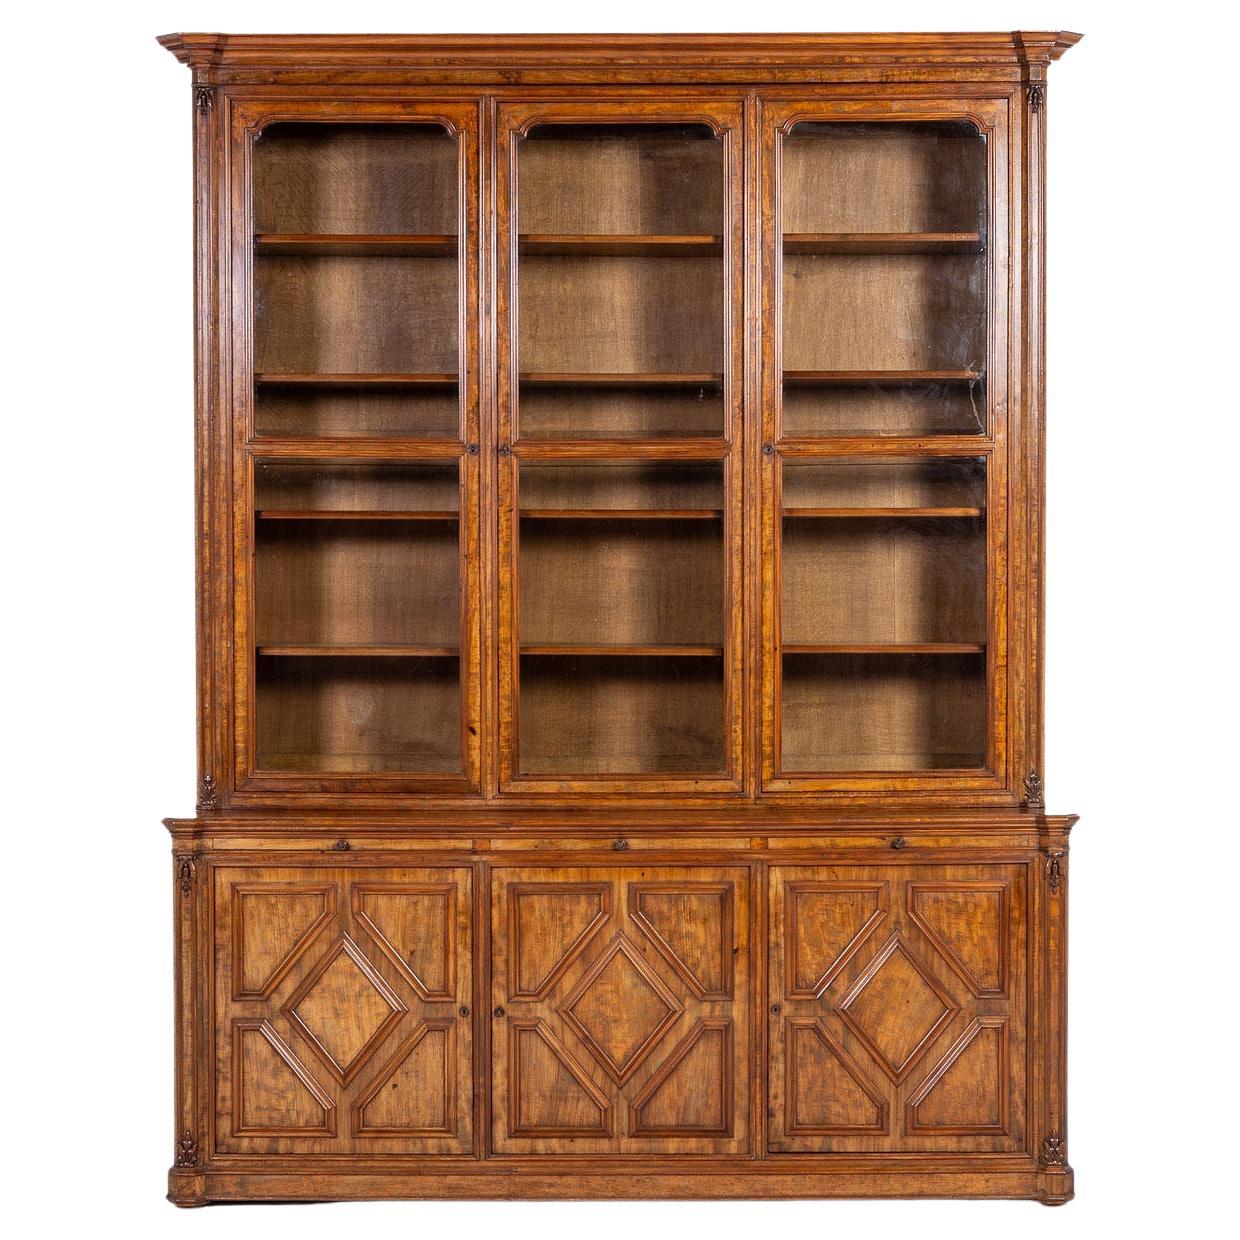 Early 19th Century French Mahogany Bookcase For Sale